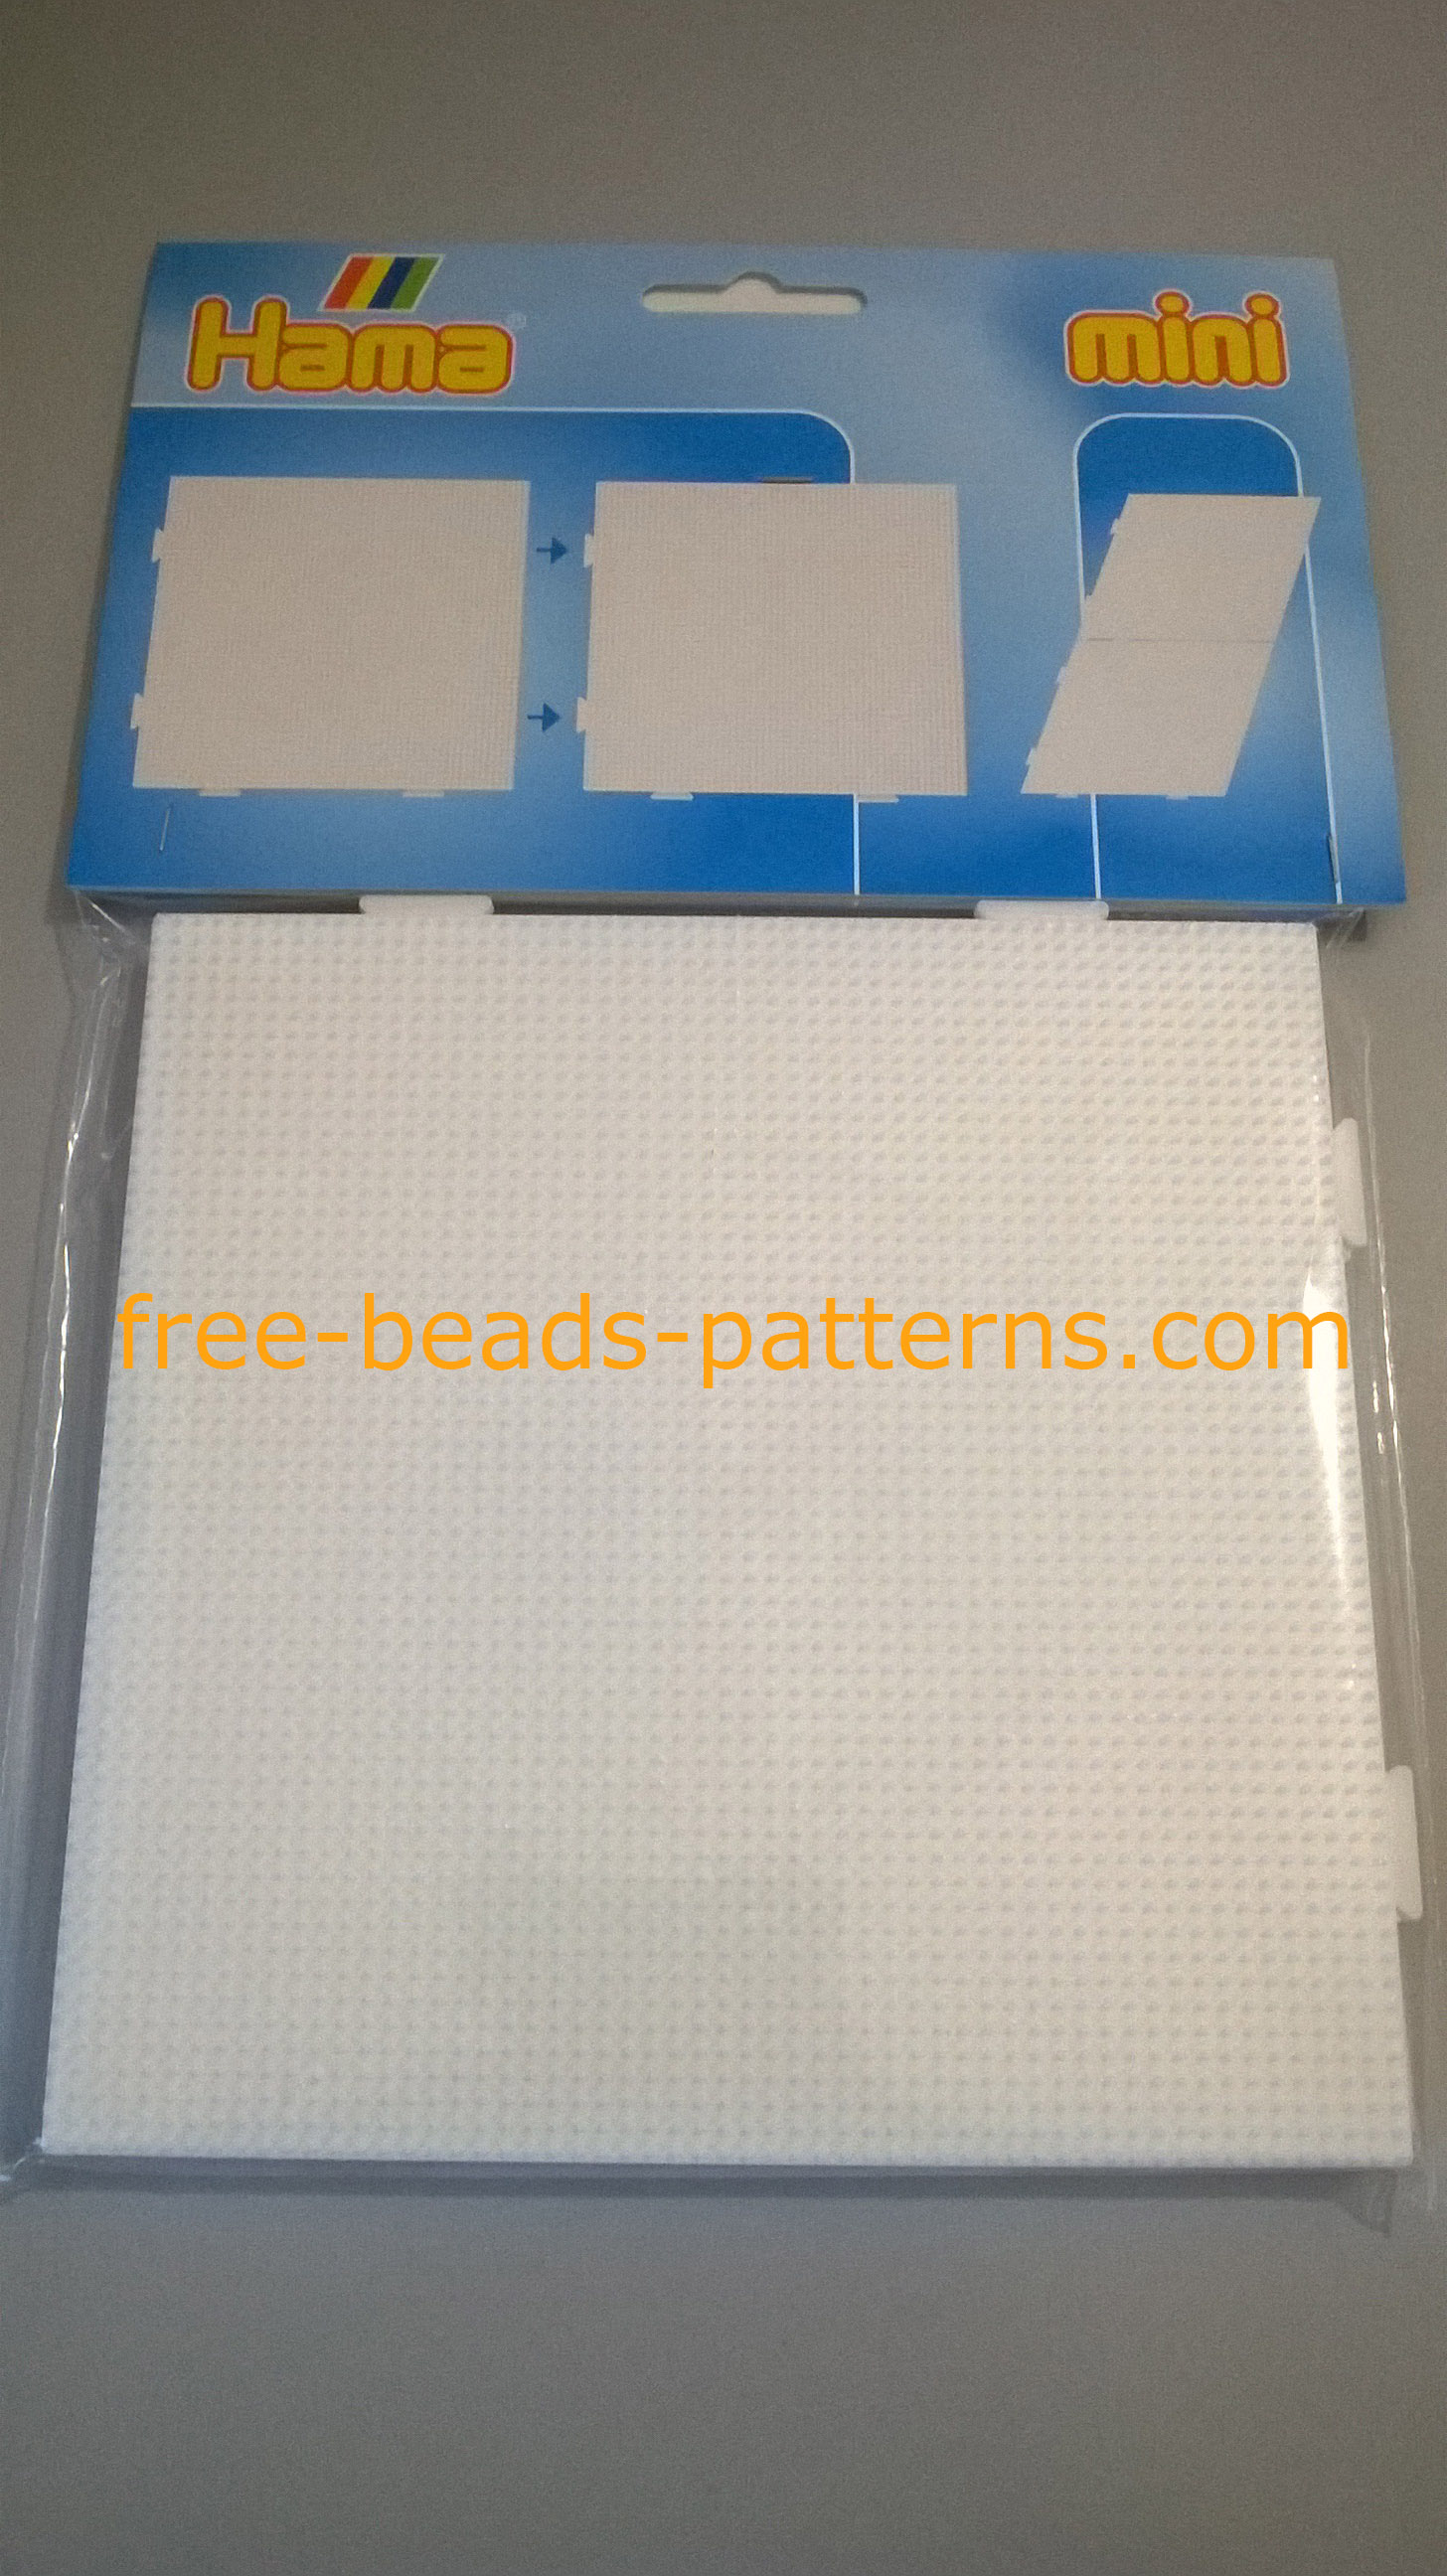 Hama Beads two squared pegboards 15 x 15 cm perler beads supplies photos